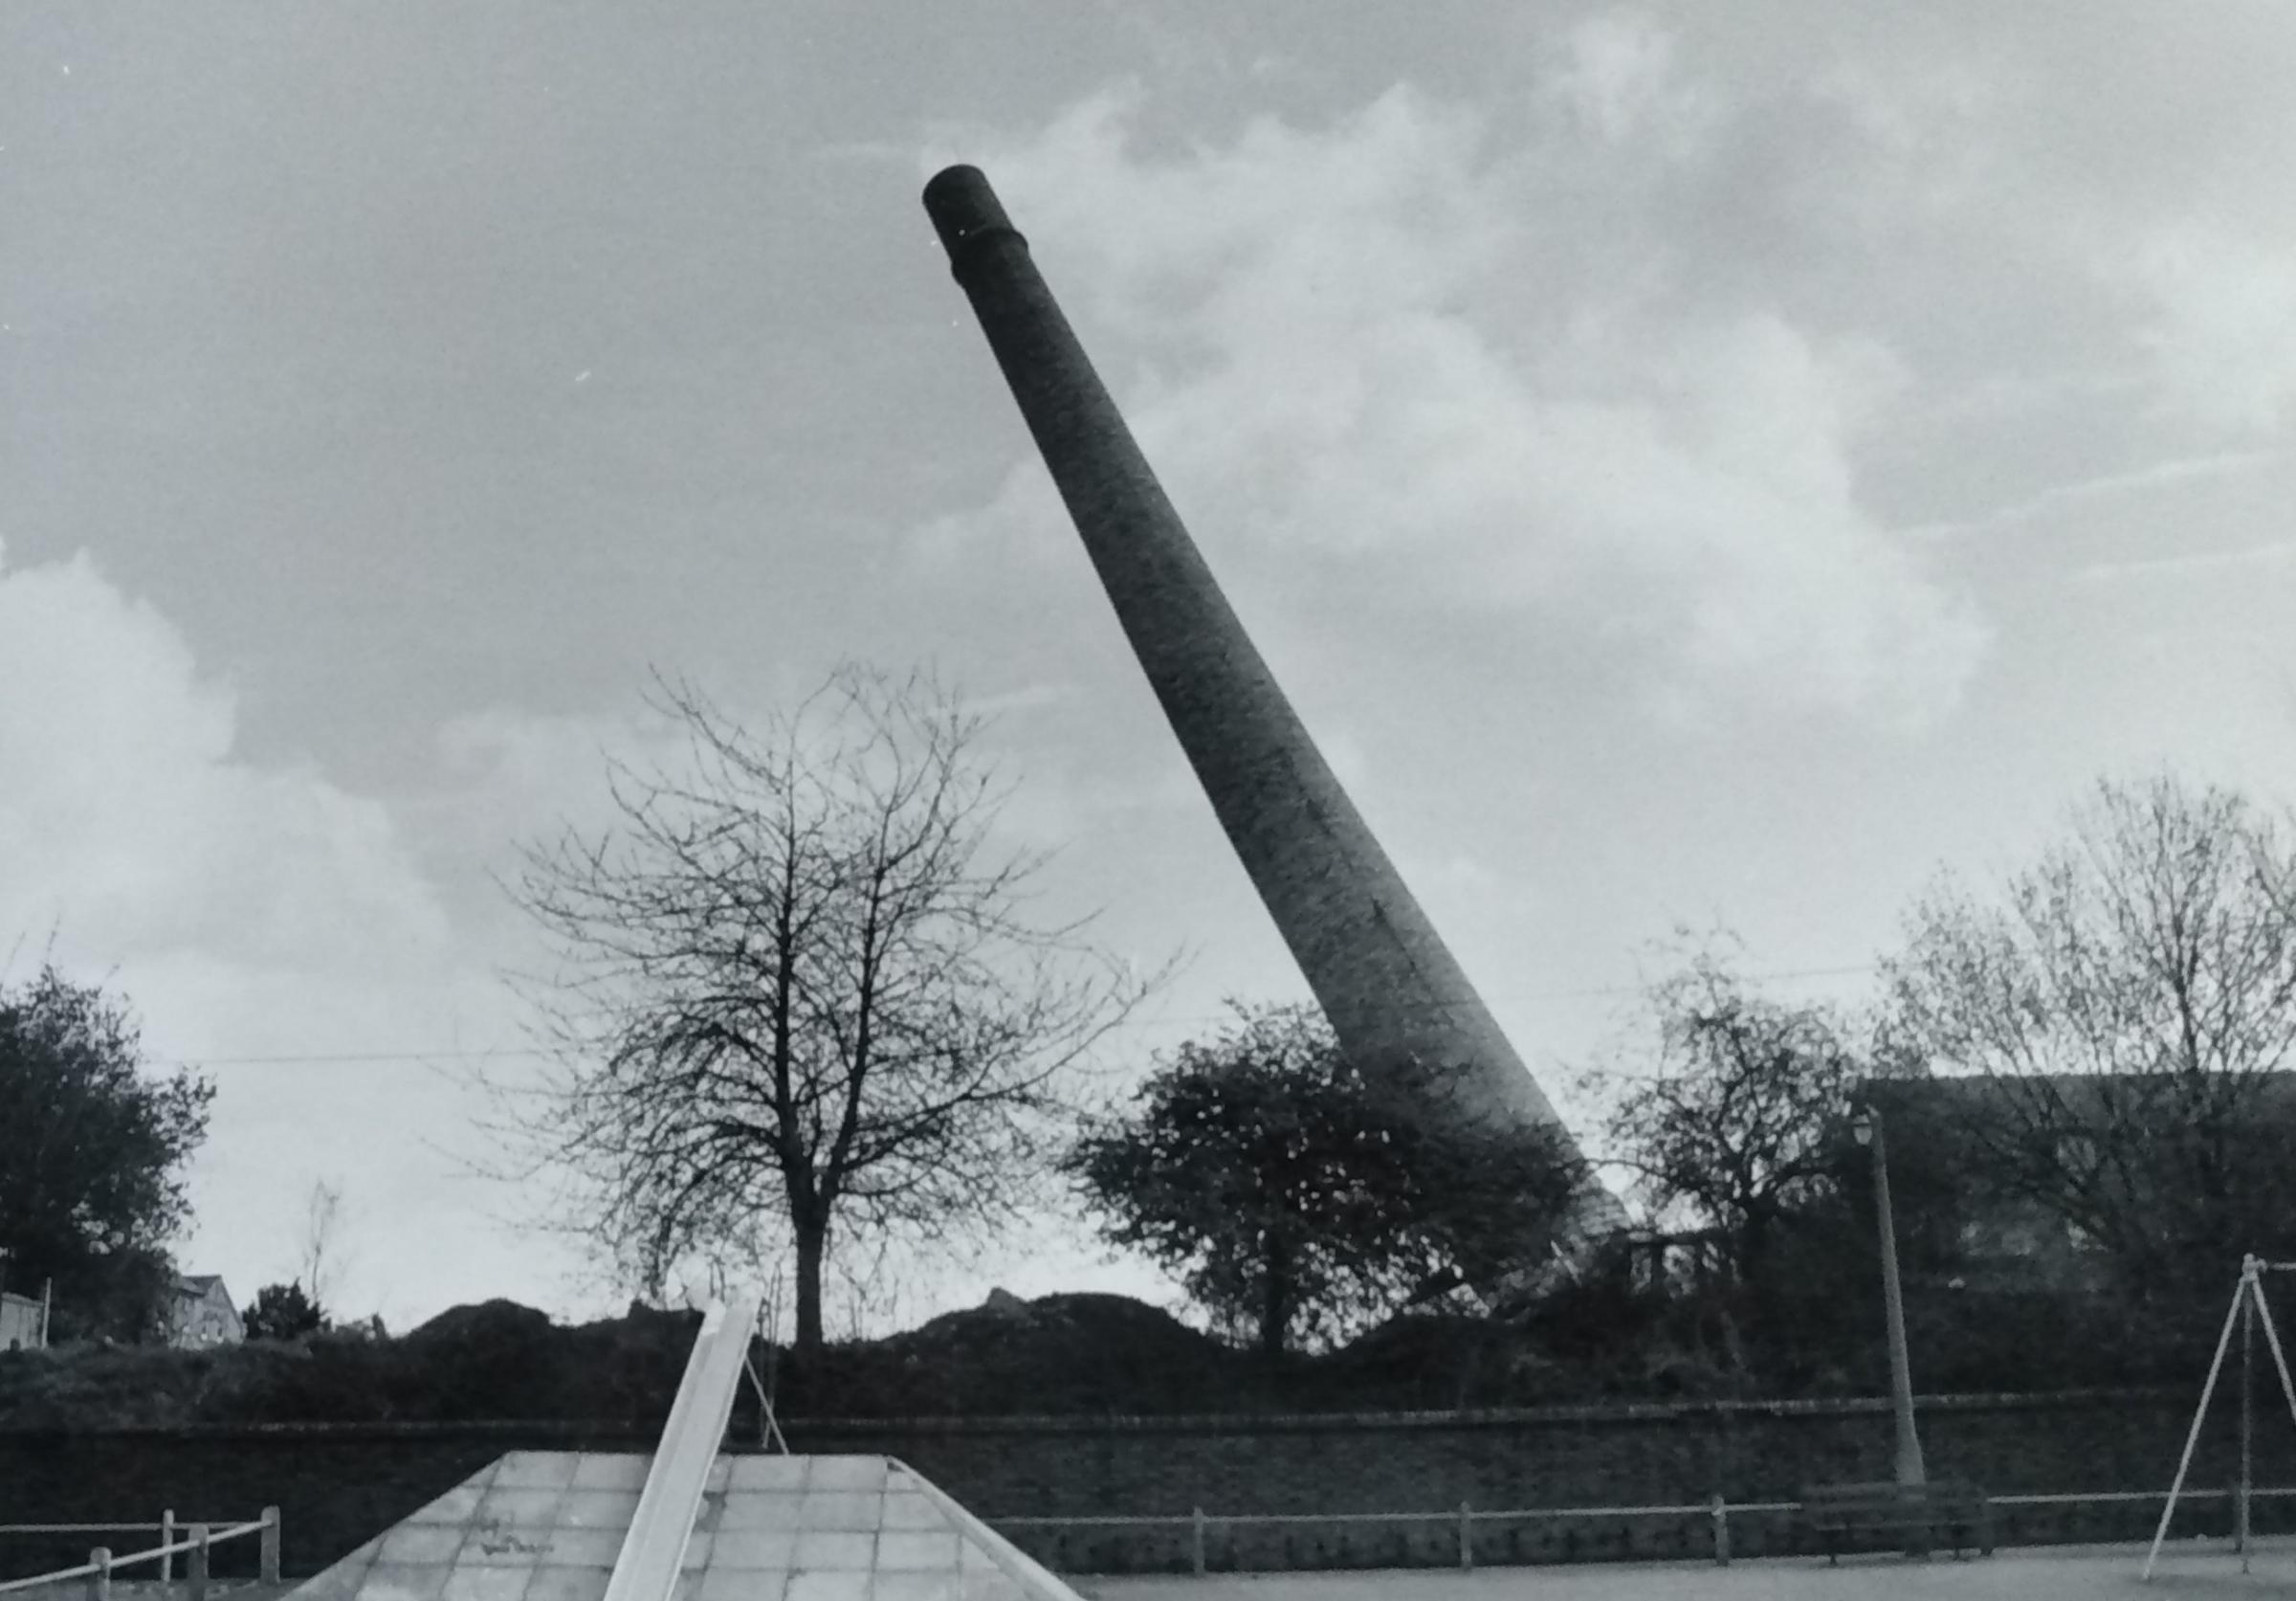 The former hospital chimney comes down in April 1987 as the former Hillborough site is flattened to make way for new housing